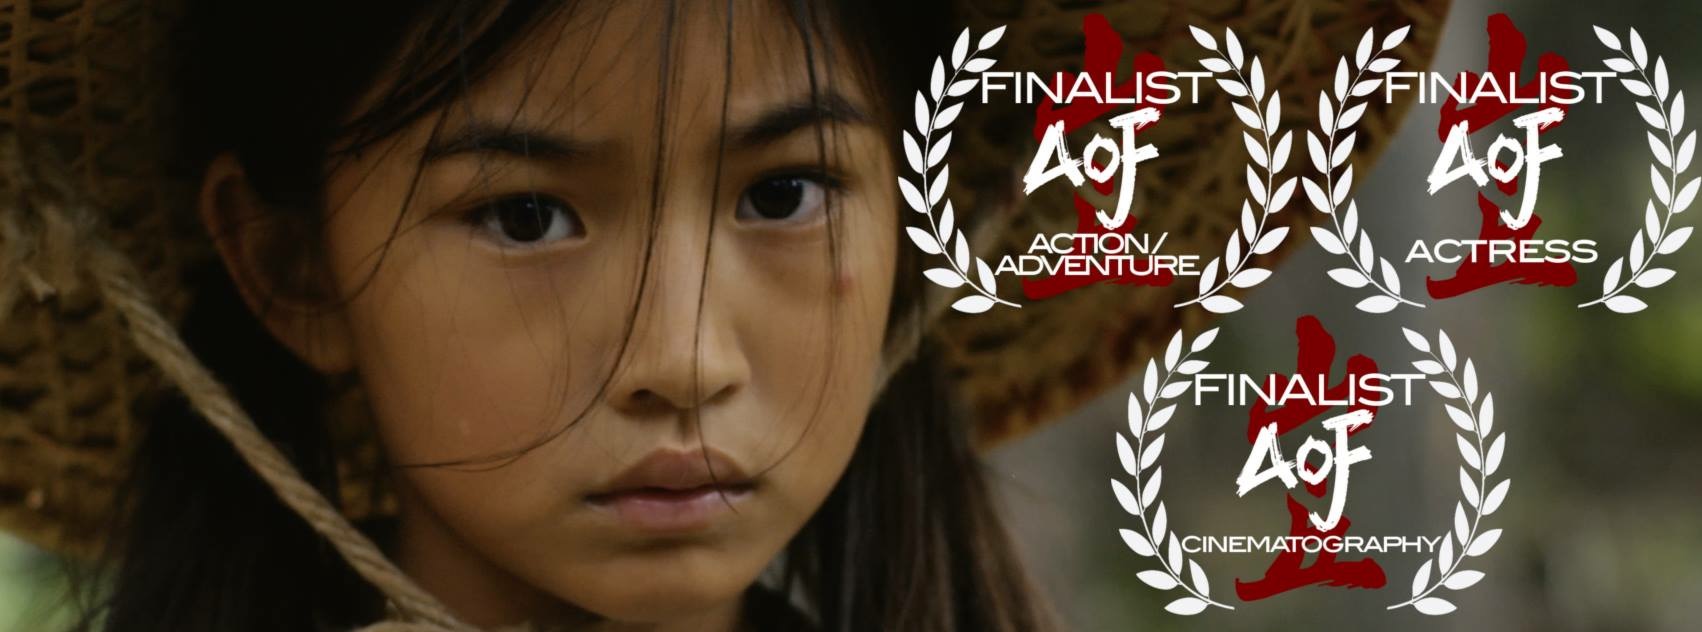 Asian On Film 2016 Best Actress Nominee.